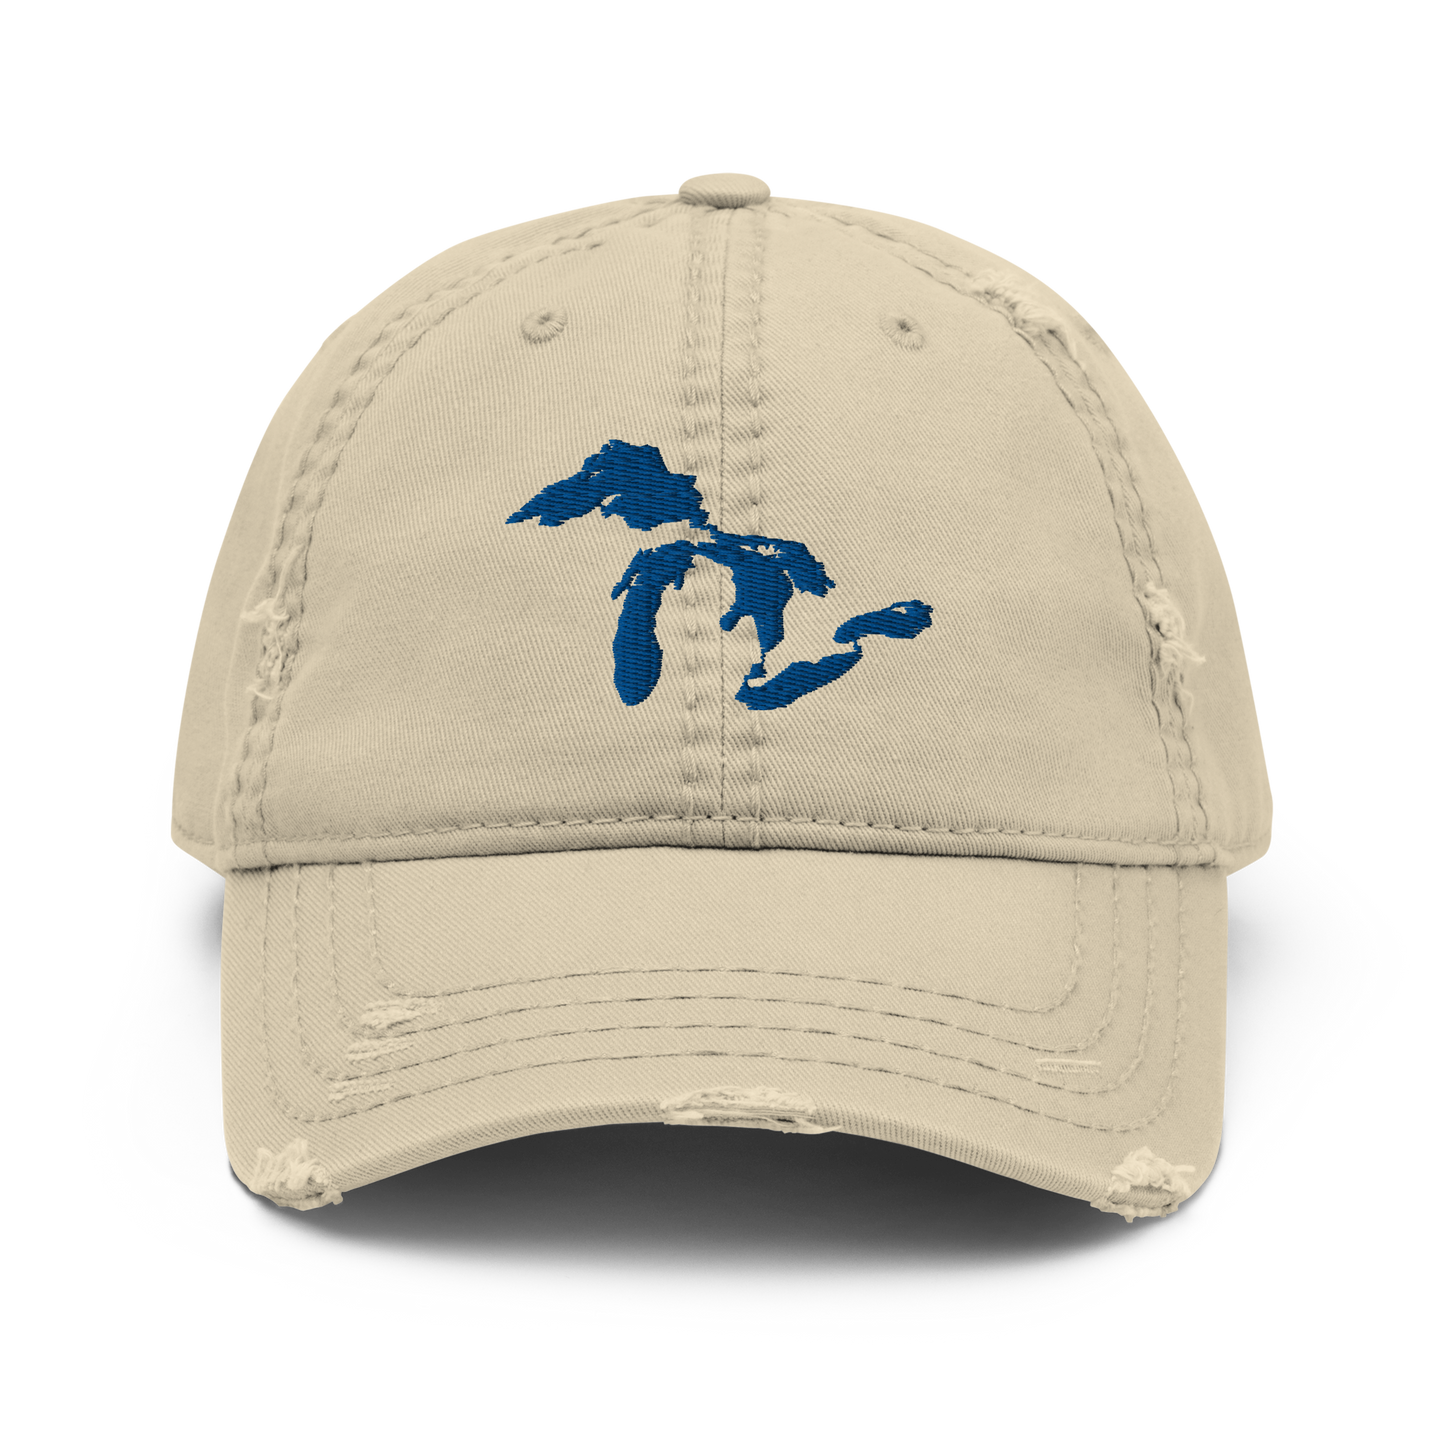 Great Lakes Distressed Dad Hat